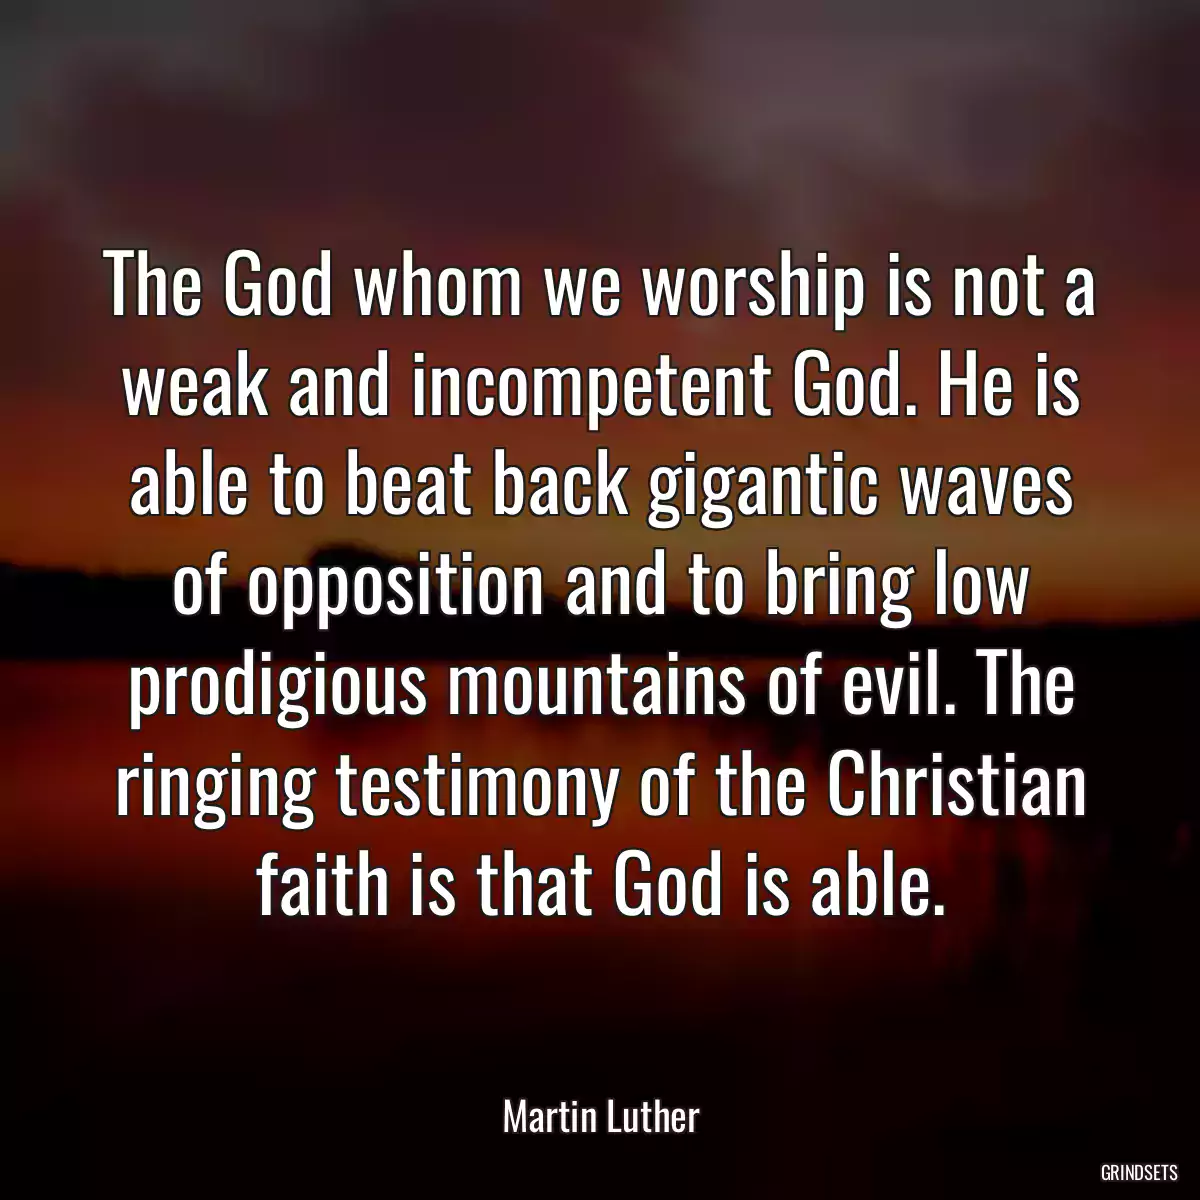 The God whom we worship is not a weak and incompetent God. He is able to beat back gigantic waves of opposition and to bring low prodigious mountains of evil. The ringing testimony of the Christian faith is that God is able.